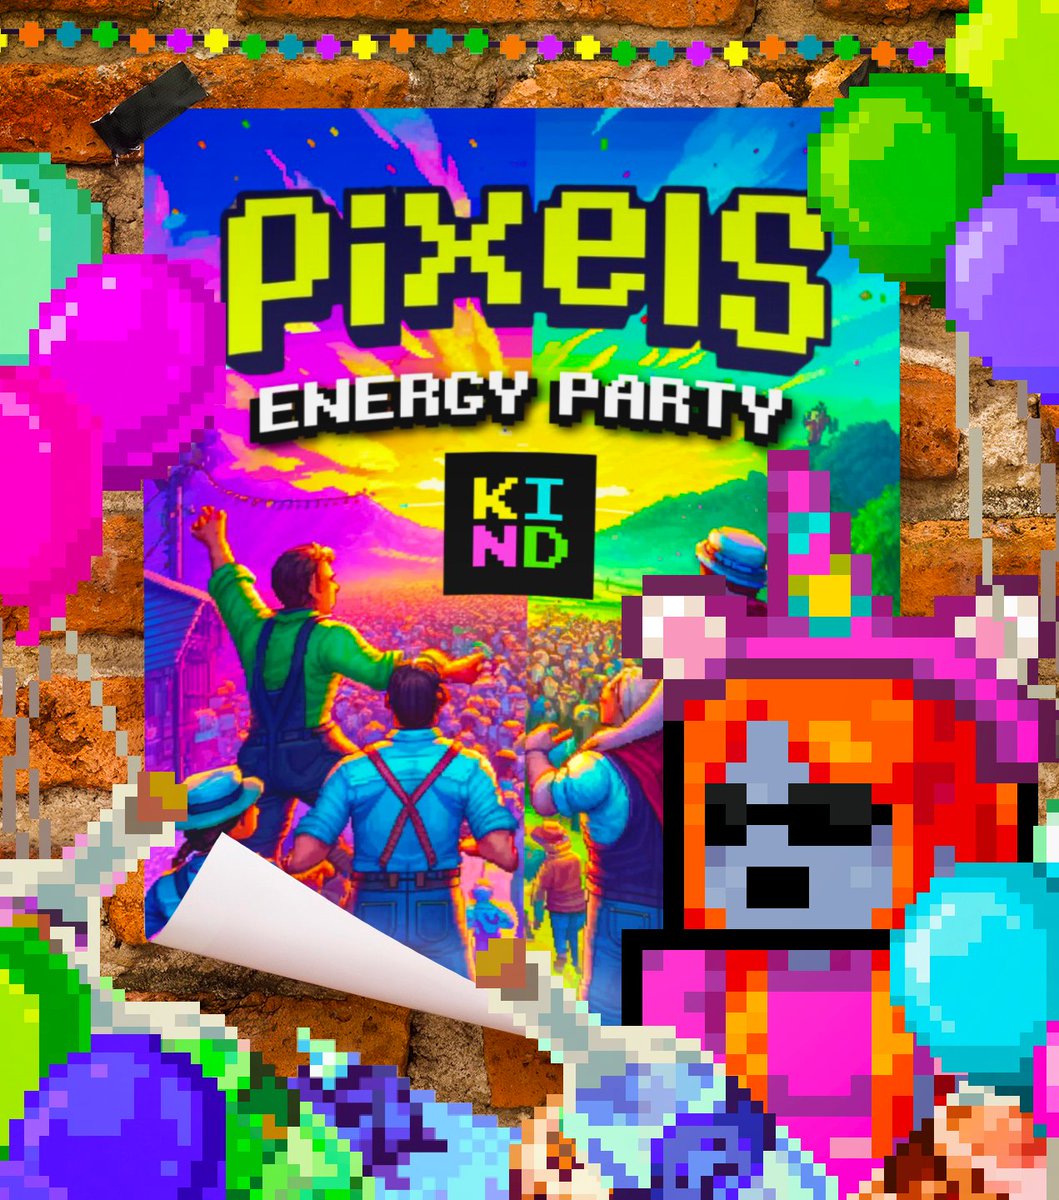 Getting Ready for the Party! 😎🎉 THIS FRIDAY!!! 🪩 ⚡️ KIND Energy Party 💛💙🩷💚 in @pixels_online 🗓️ April 19th ⏰ 10 AM EST | 2 PM UTC 📍 The Drunken Goose ▶️ Live on TWITCH: twitch.tv/kind_hq 🎁🎁🎁 🔸 $PIXEL Prizes! 🔸 3 Pixels 3 Month VIP 🔸 1 TEK Guild Shard